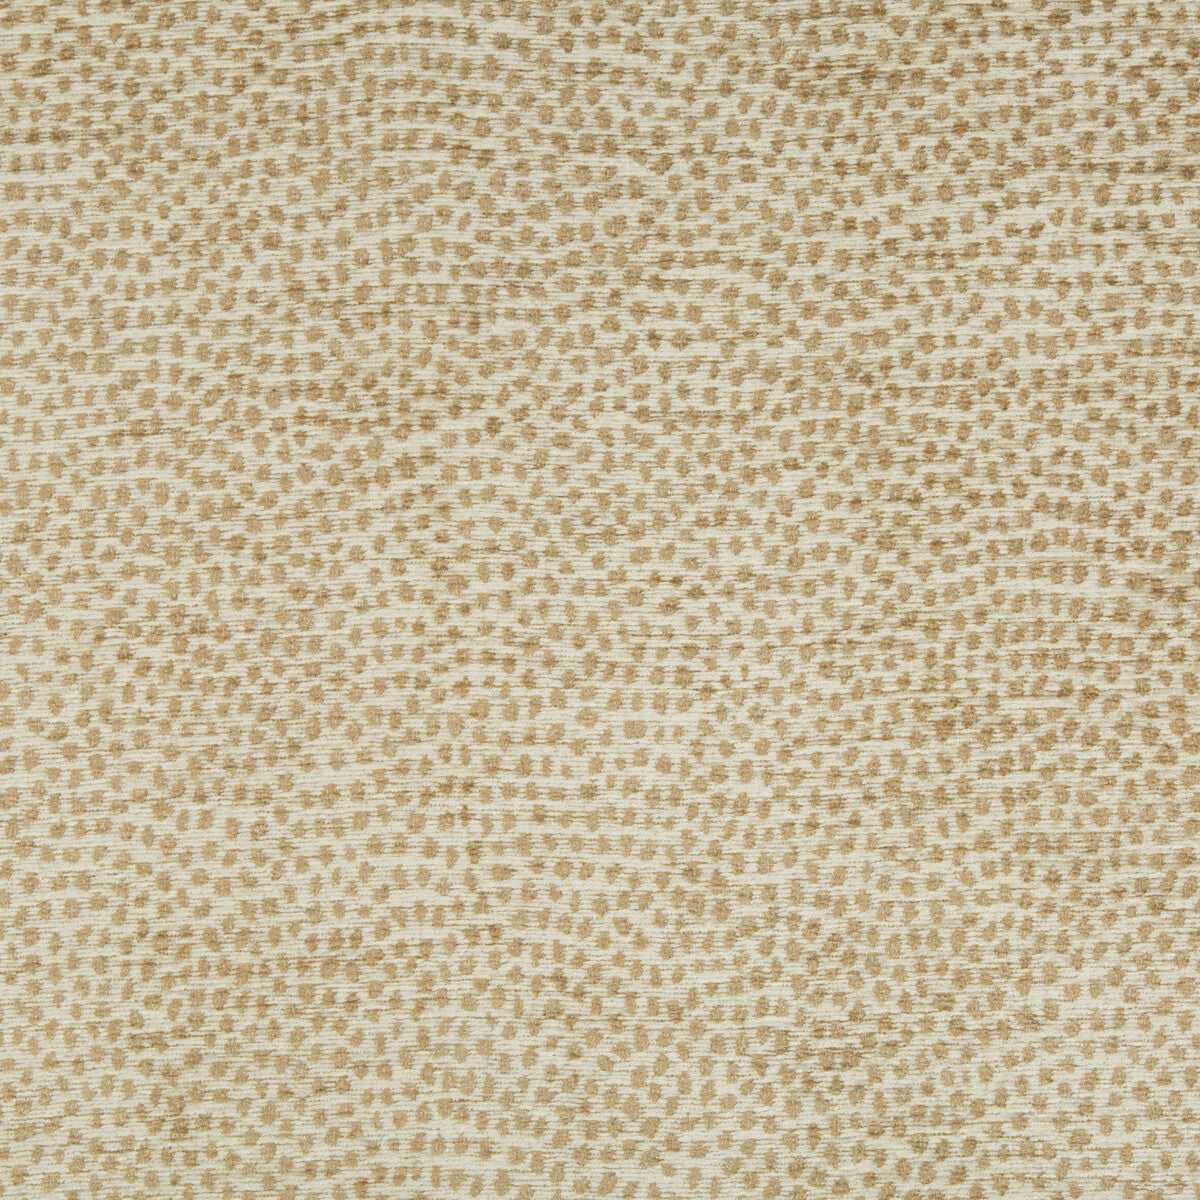 Kravet Contract fabric in 35012-4 color - pattern 35012.4.0 - by Kravet Contract in the Incase Crypton Gis collection